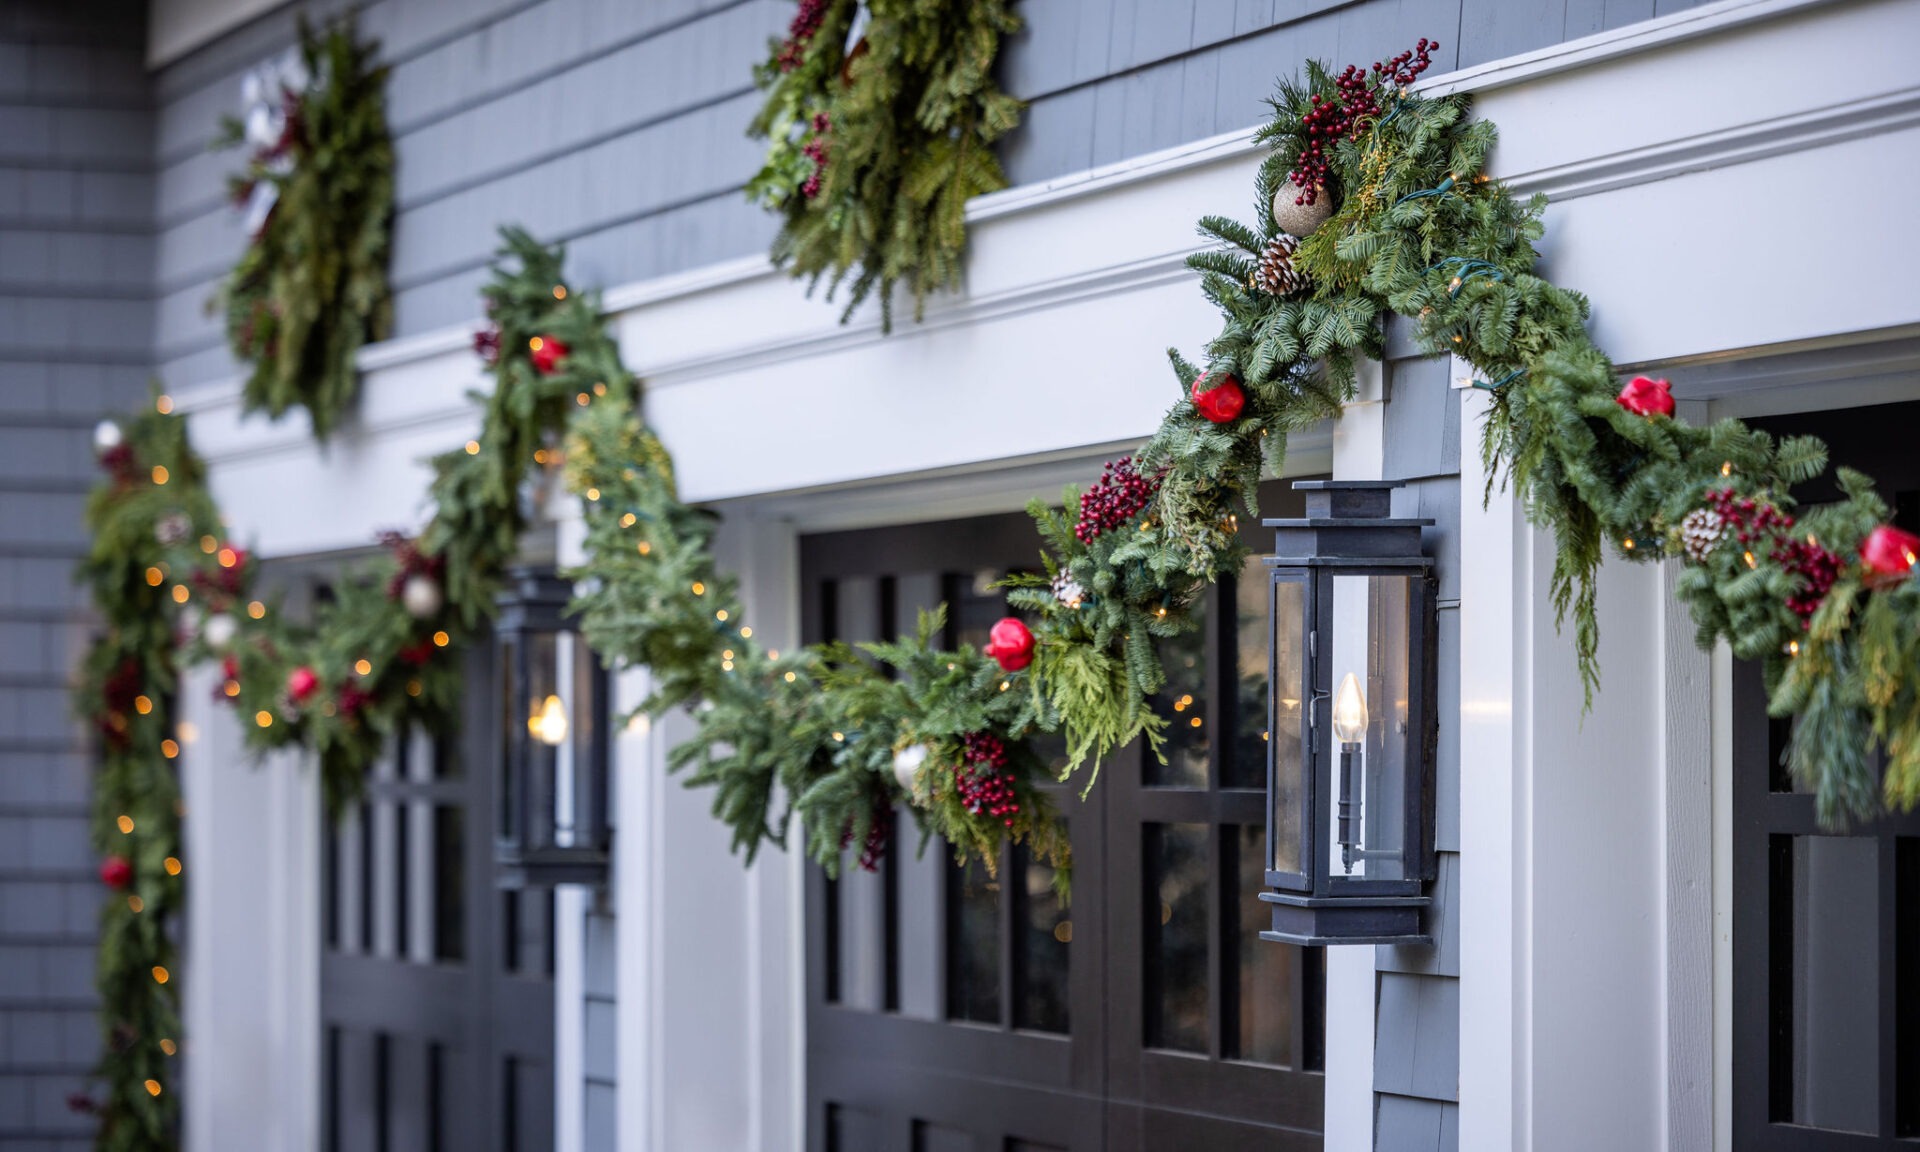 An outdoor holiday decoration with evergreen garlands, red ornaments, and lights adorning a building's exterior, featuring a lantern and festive ambiance.